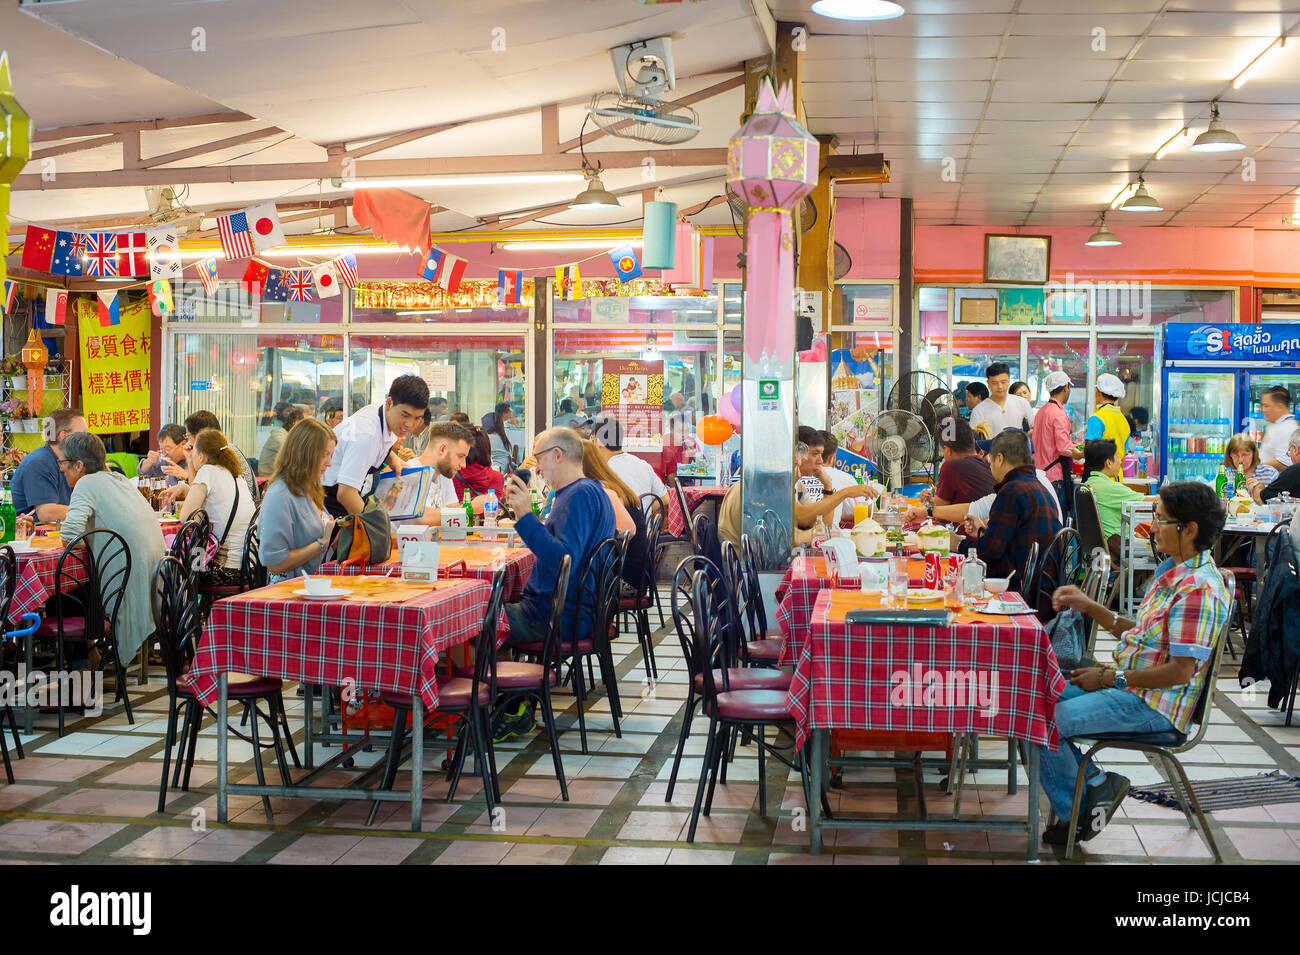 CHIANG MAI, THAILAND - JAN 11, 2017: People at a street restaurant at night market in Chiang Mai. Chiang Mai is a culture capital of Thailand Stock Photo